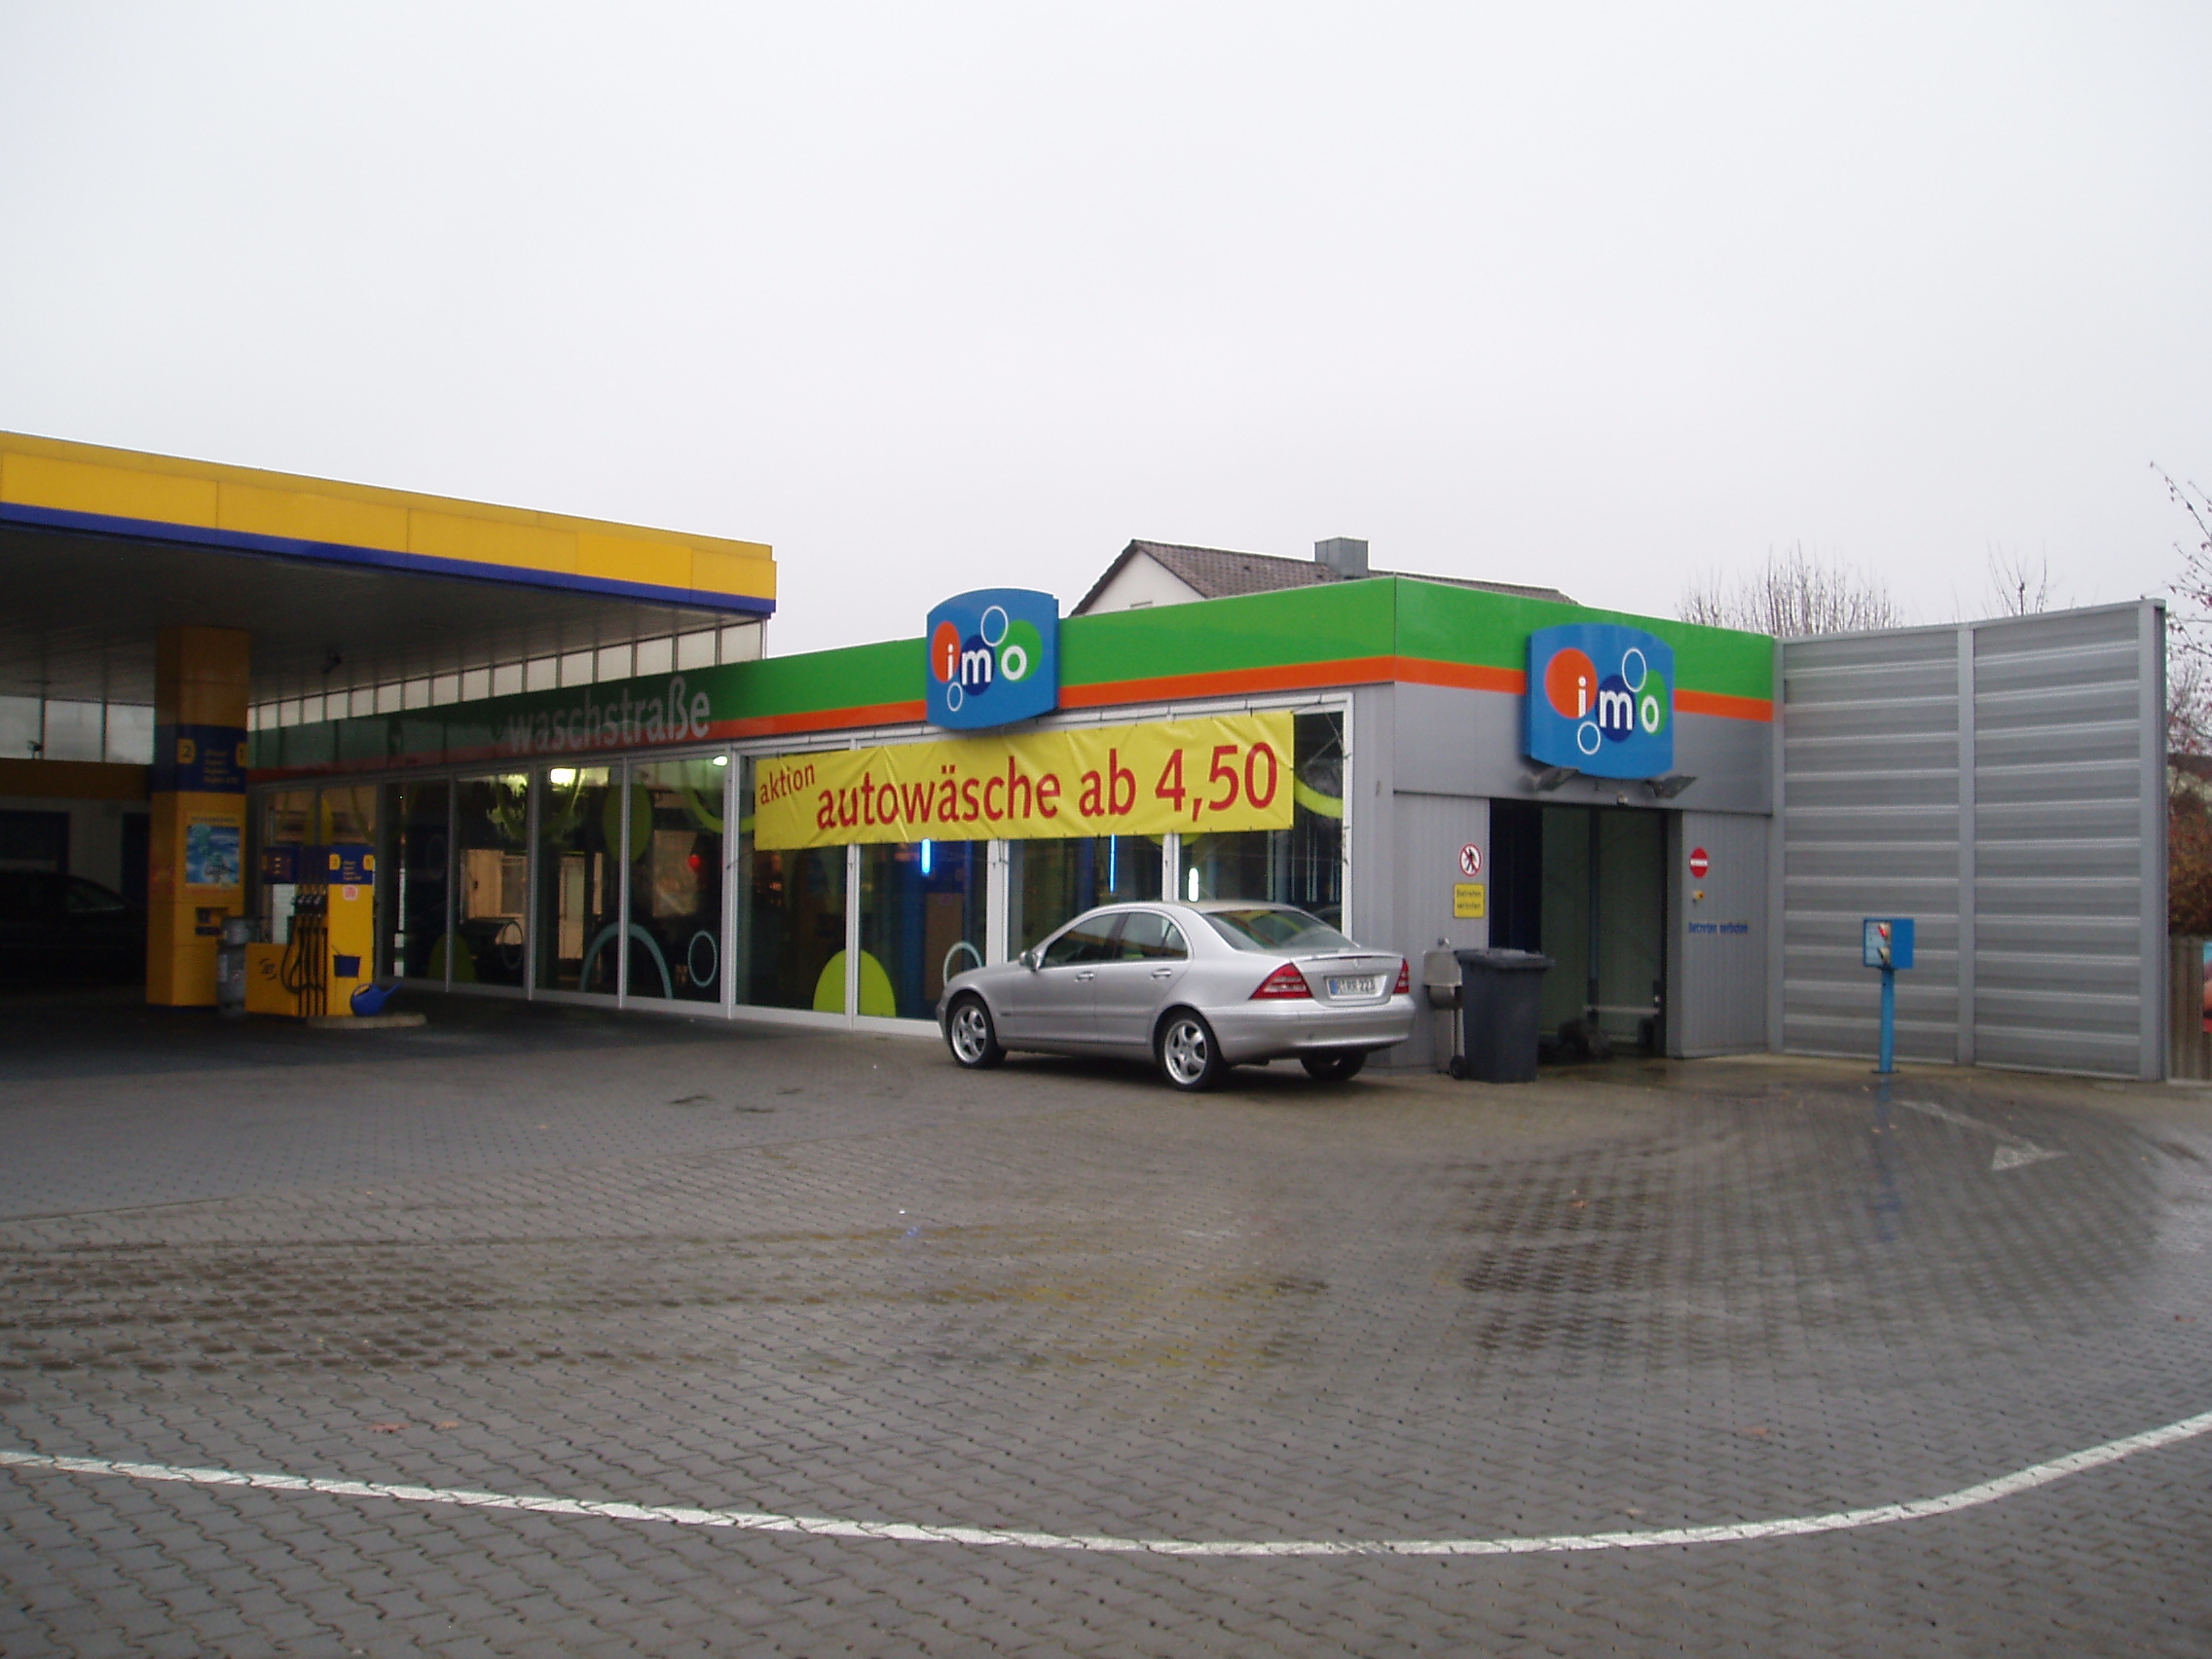 The Best Addresses For Car Wash In Regensburg There Are 22 Results For Your Search Infobel Germany